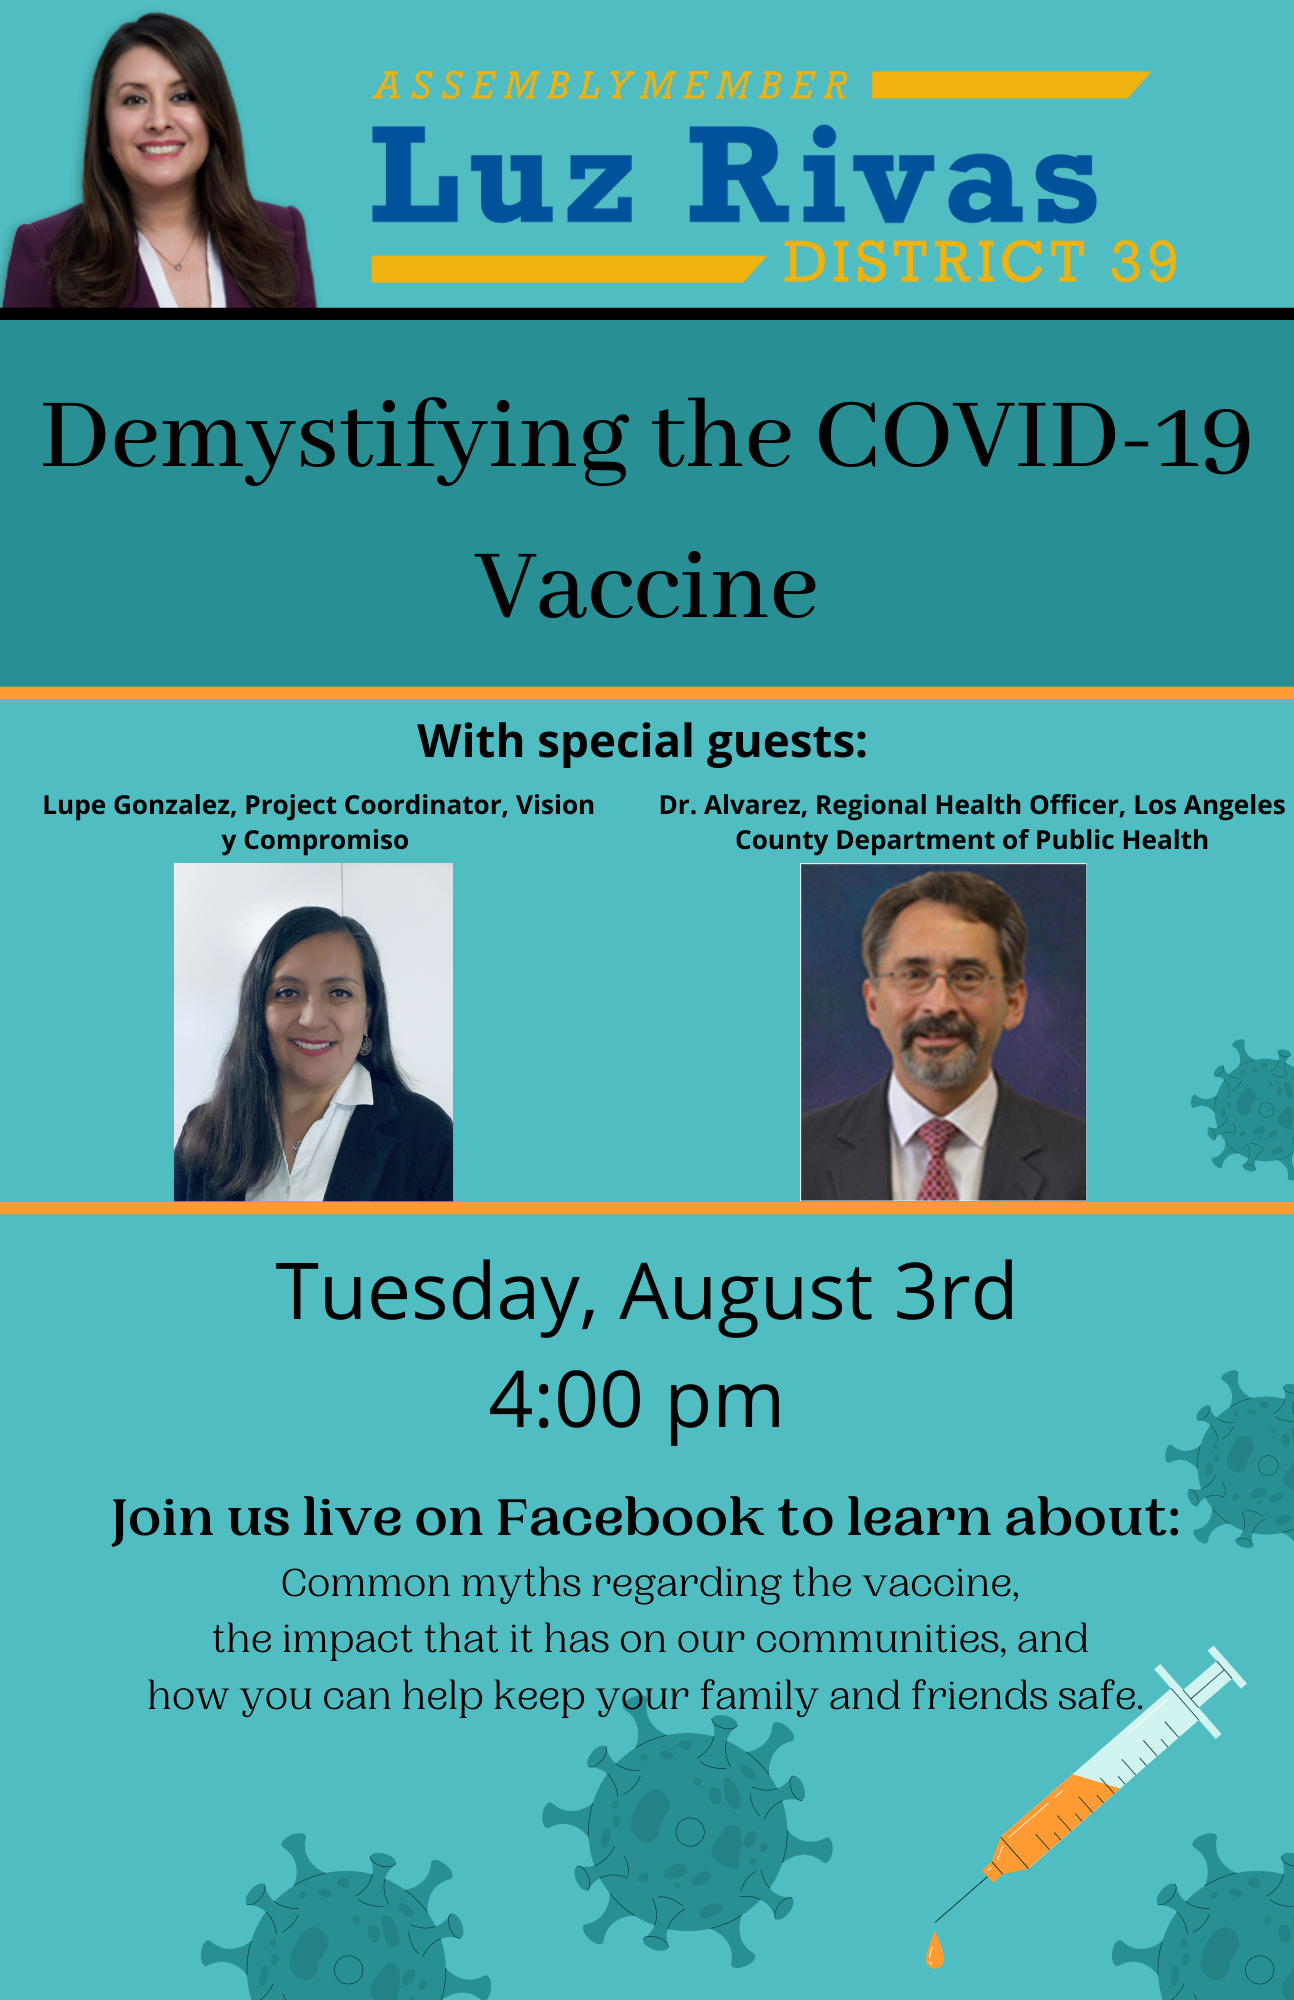 Demystifying the COVID-19 Vaccine